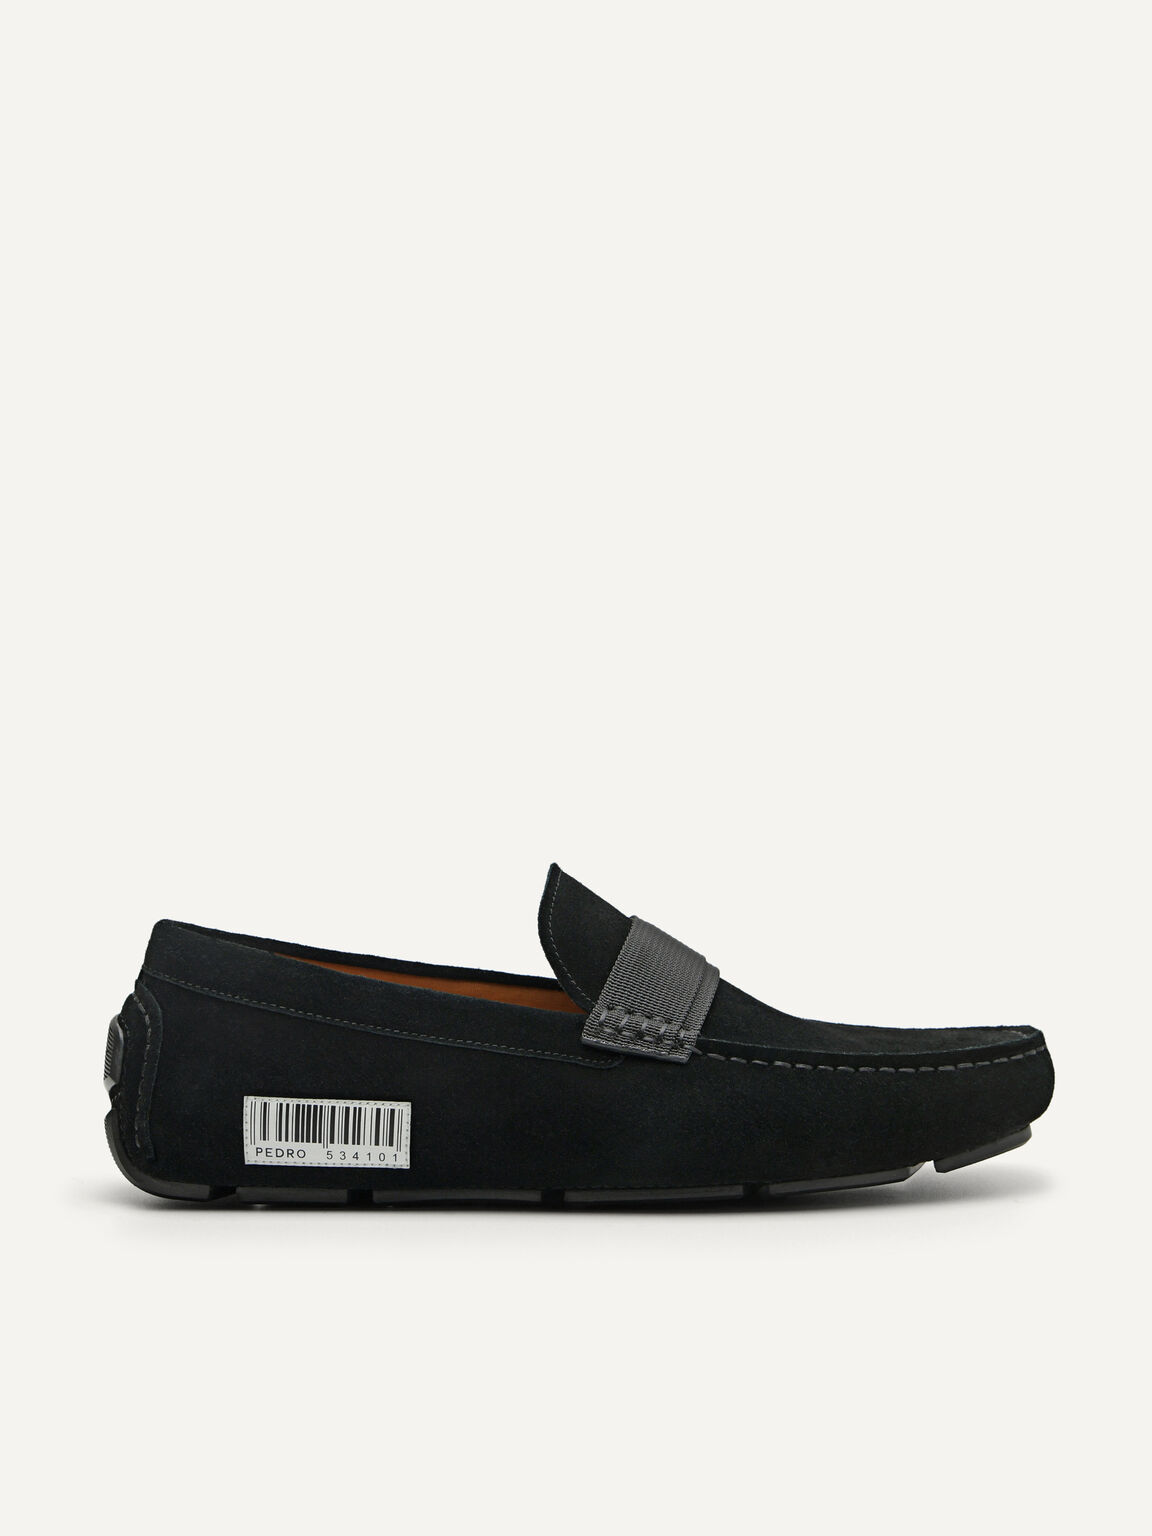 Suede Barcode Driving Moccassins, Black